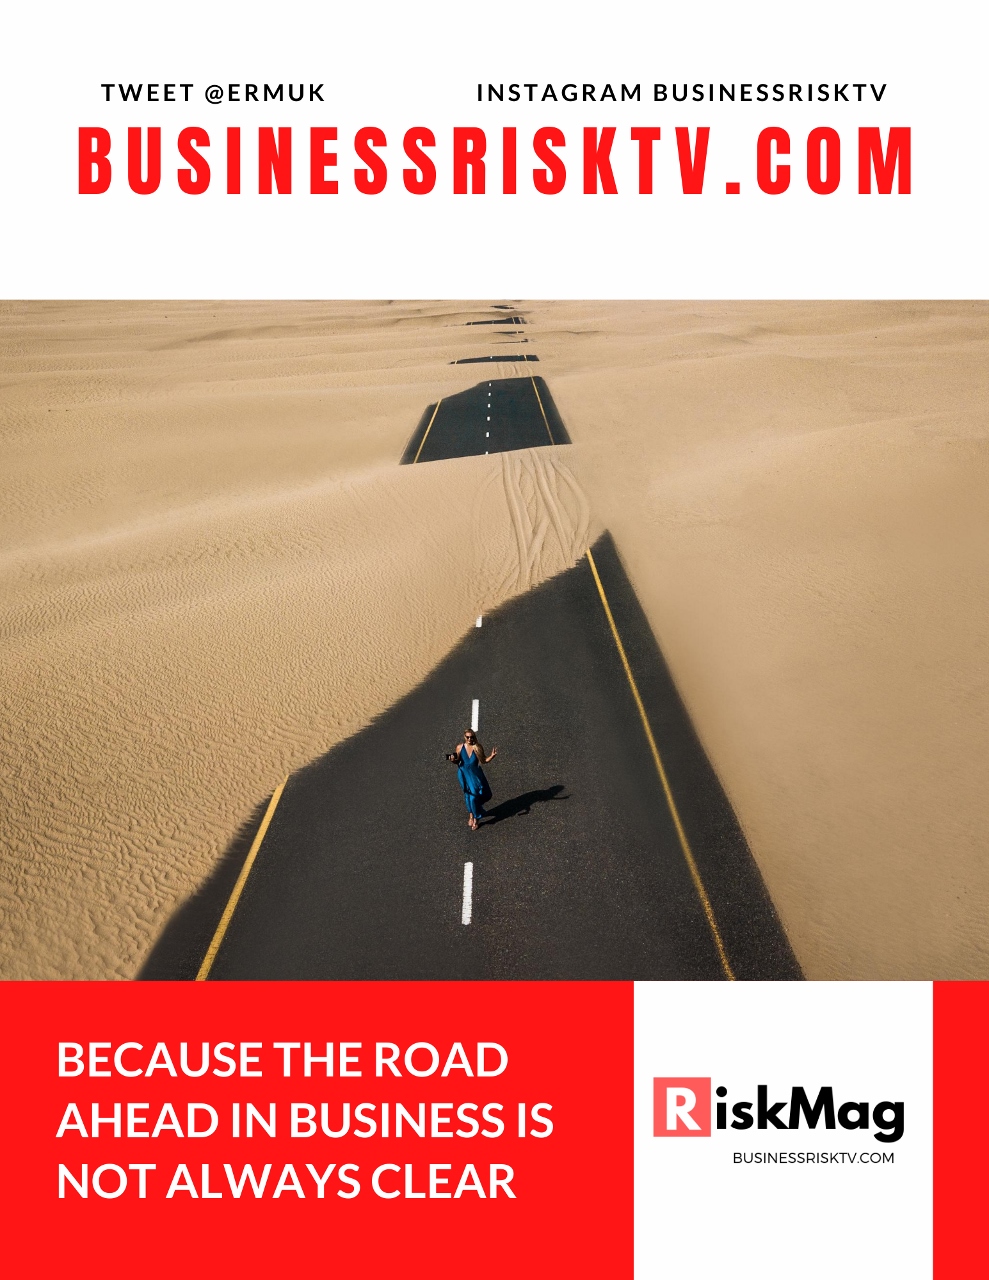 See The Road Ahead More Clearly With BusinessRiskTV